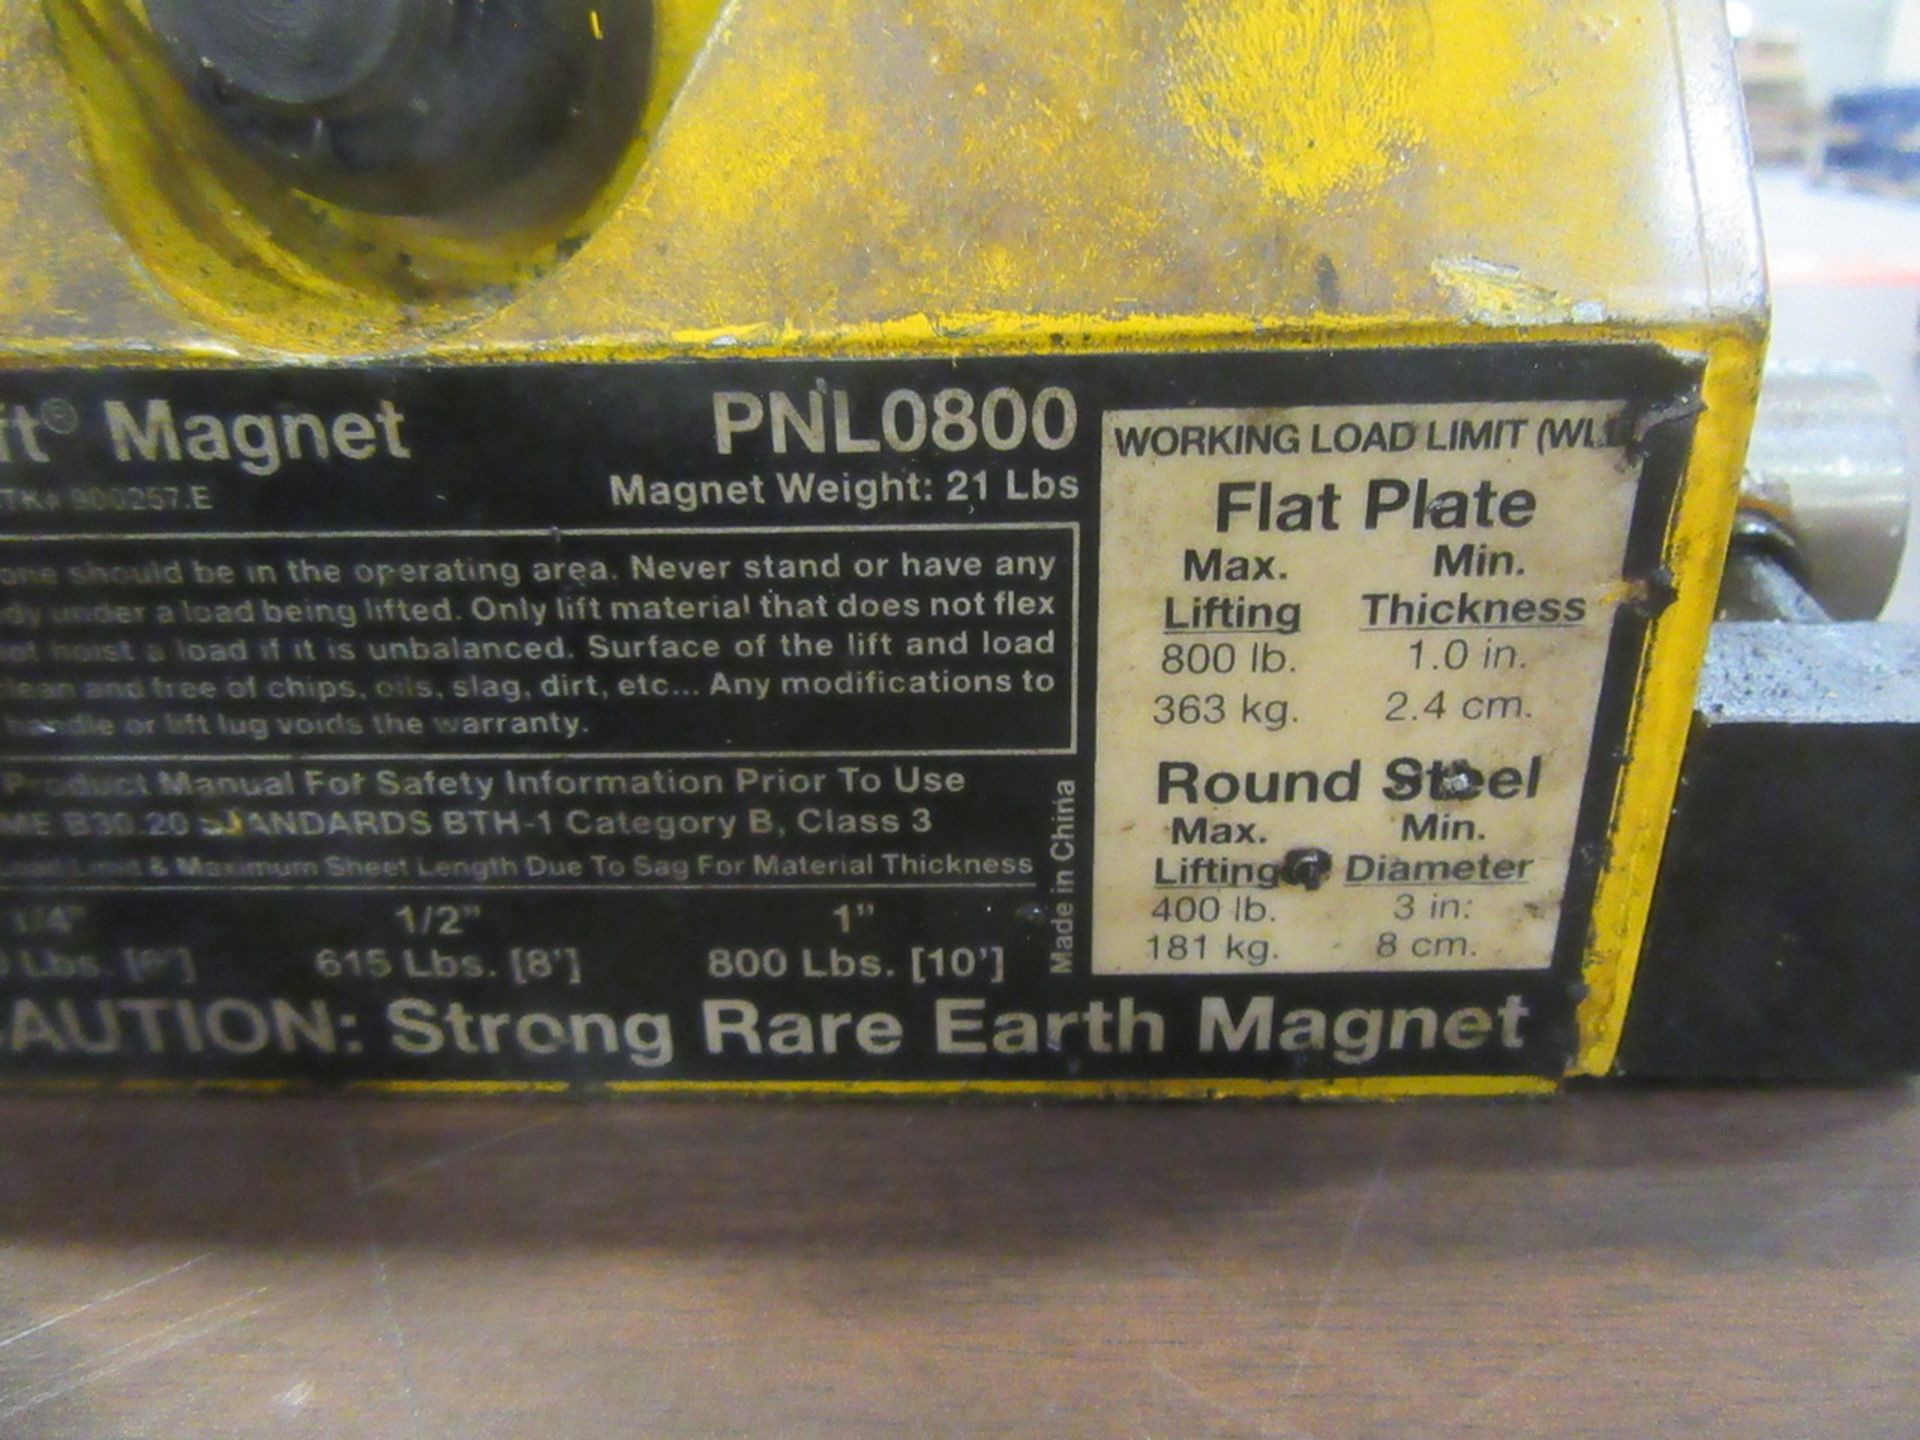 Mag-Mate PNL0800 Powerlift Magnet - Image 2 of 3